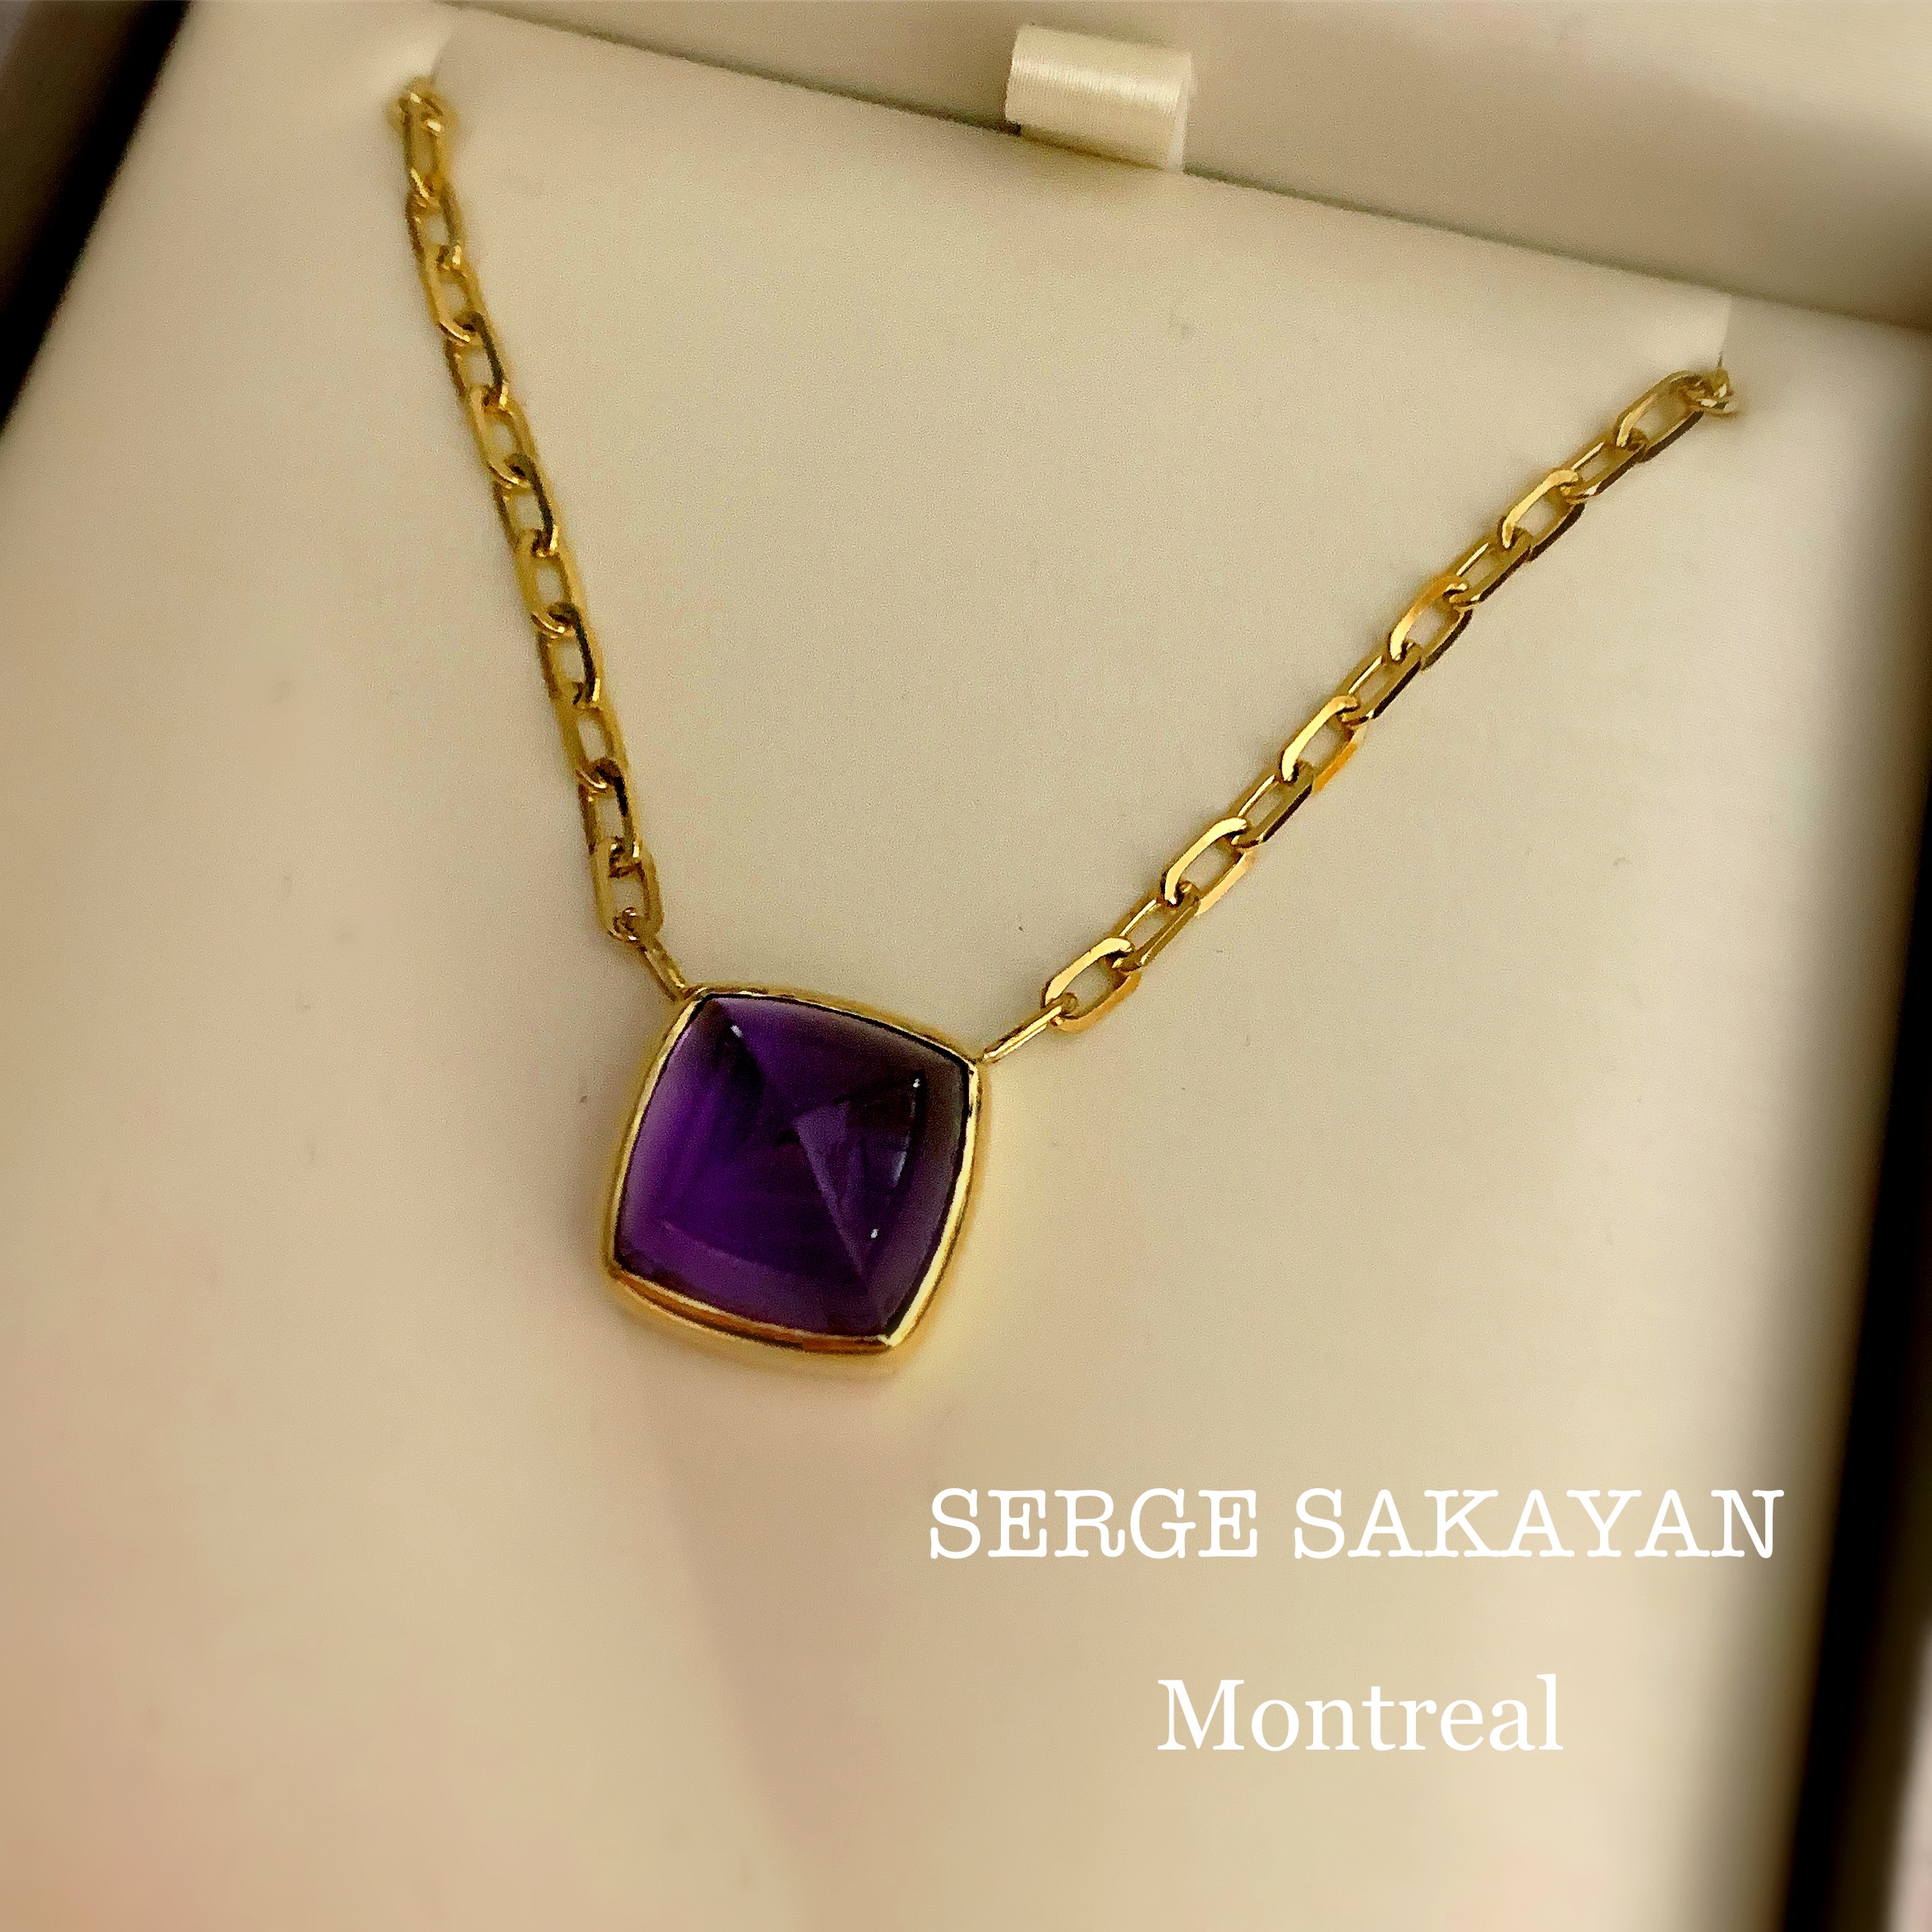 Single Amethyst Pyramid Capuchon Necklace in 14k Yellow Gold. | Serge